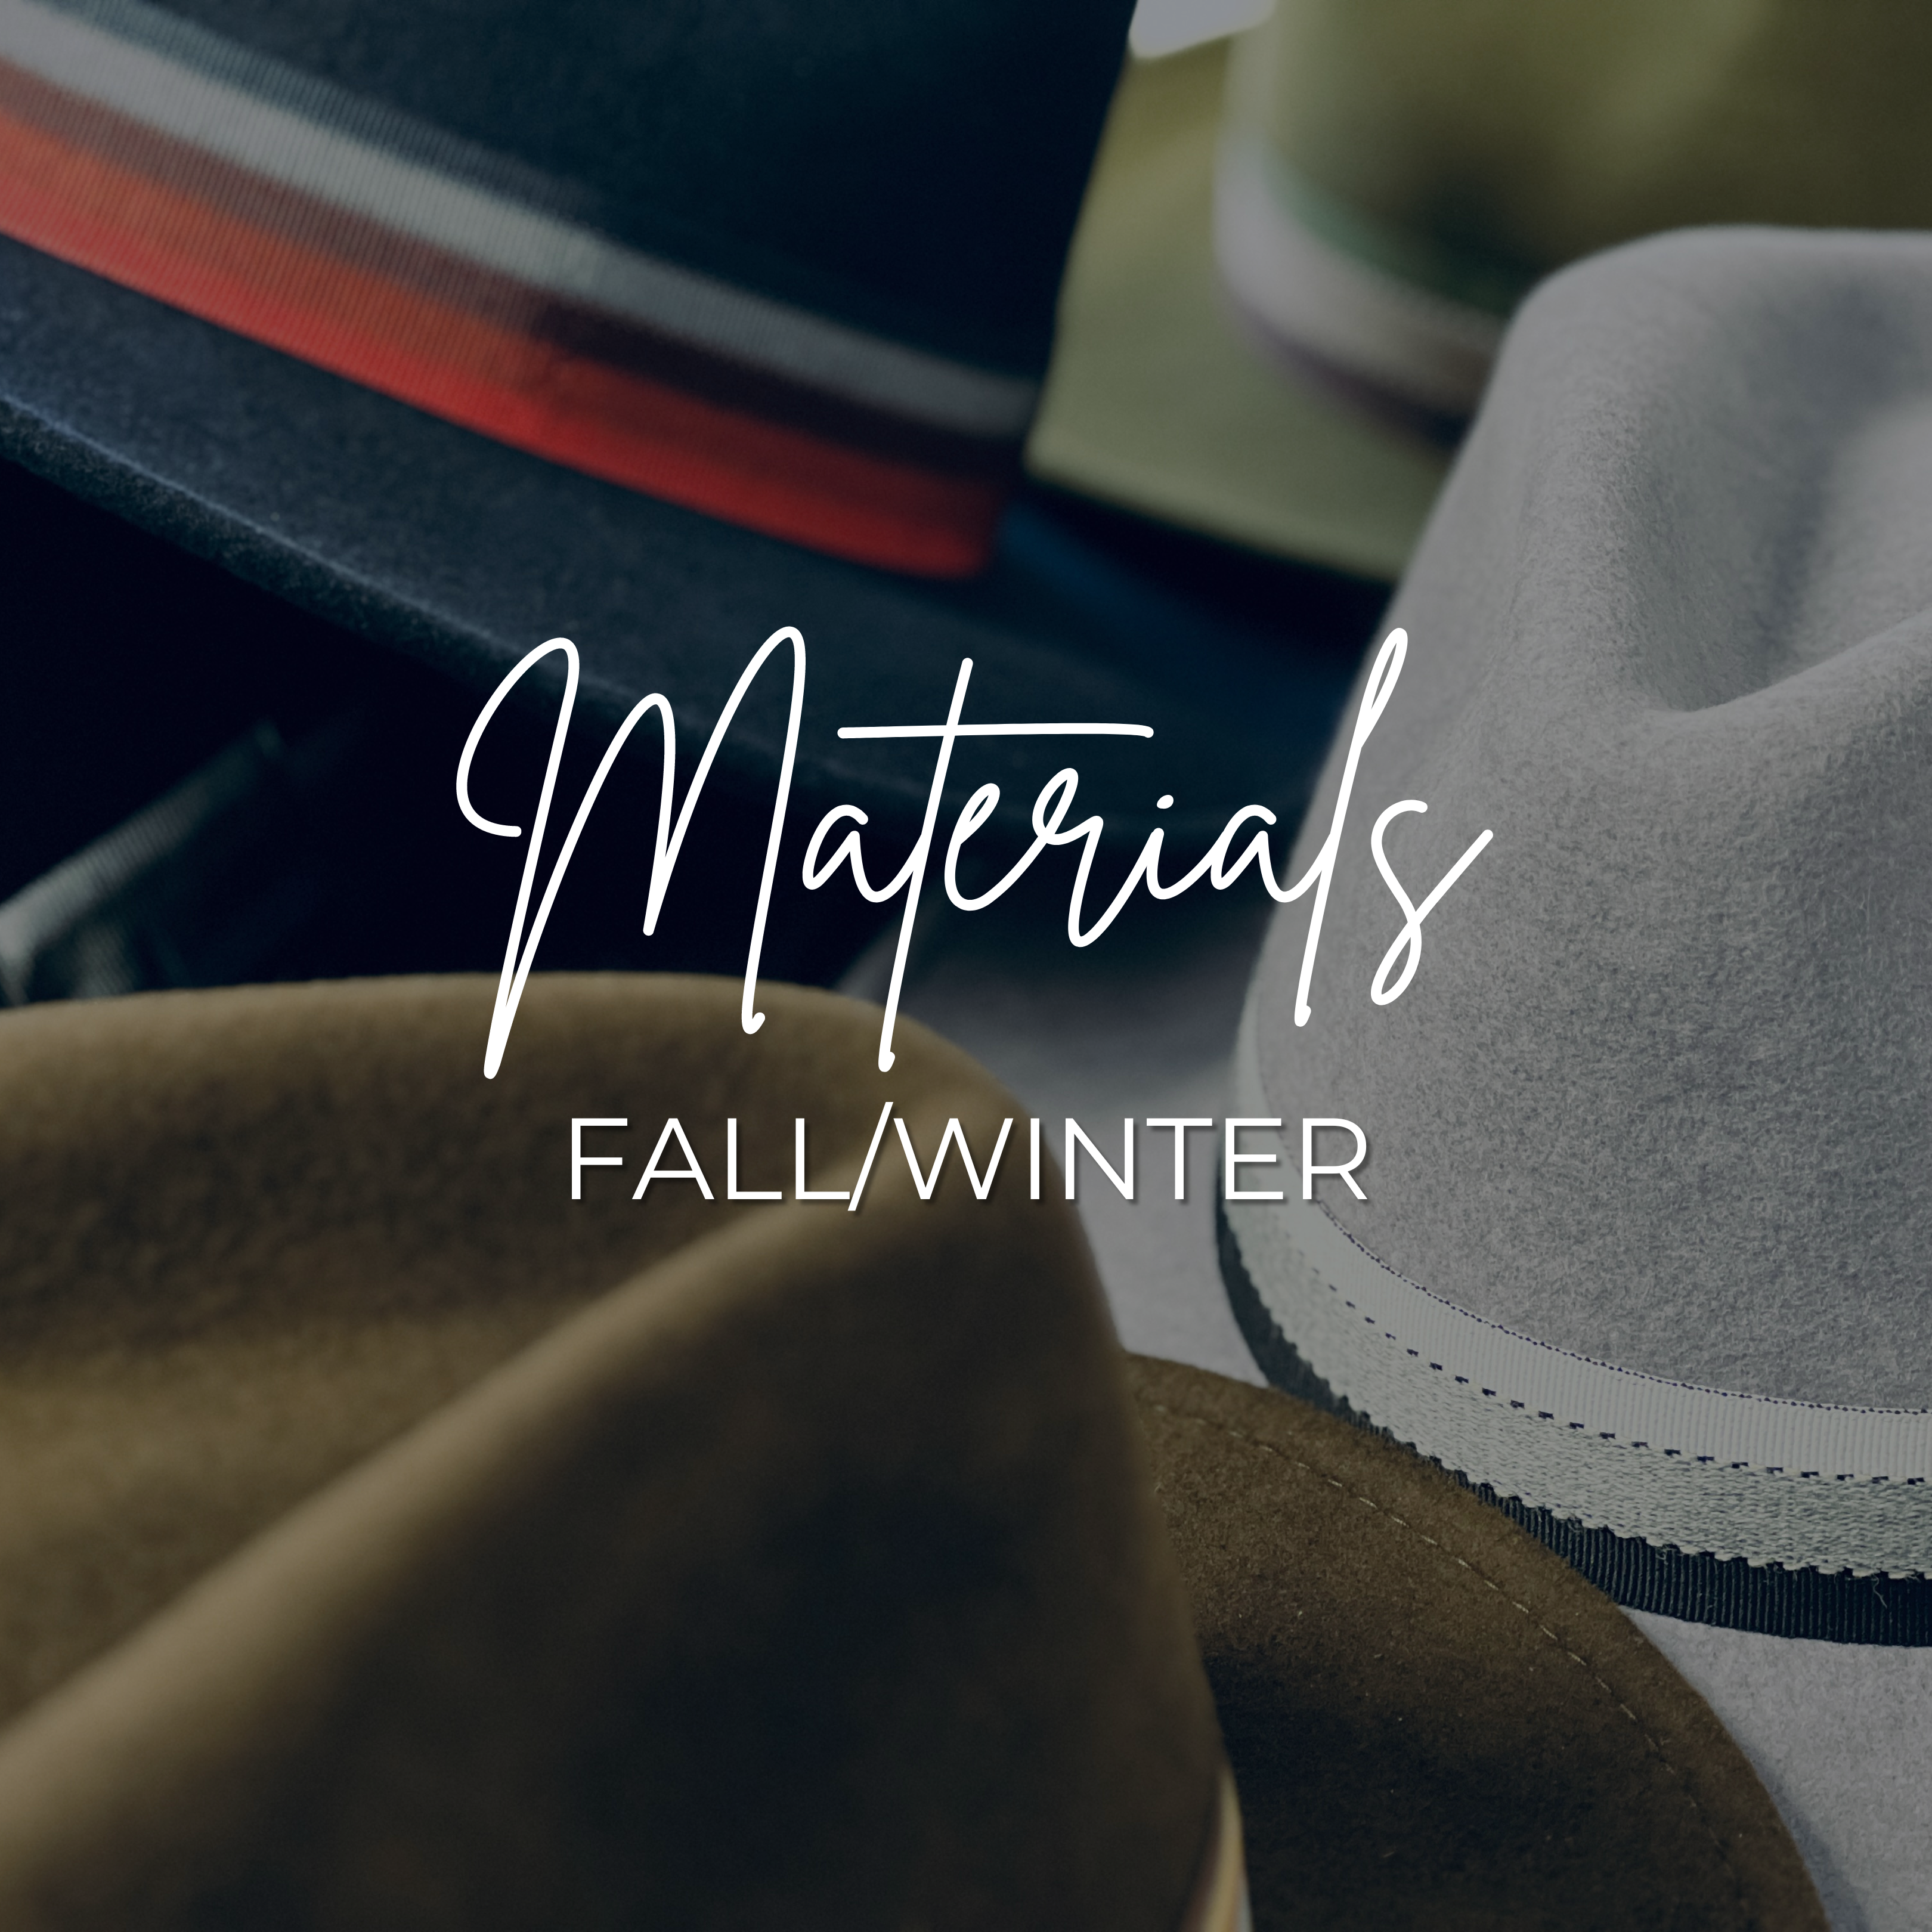 Hat Knowledge: Materials - Fall/Winter